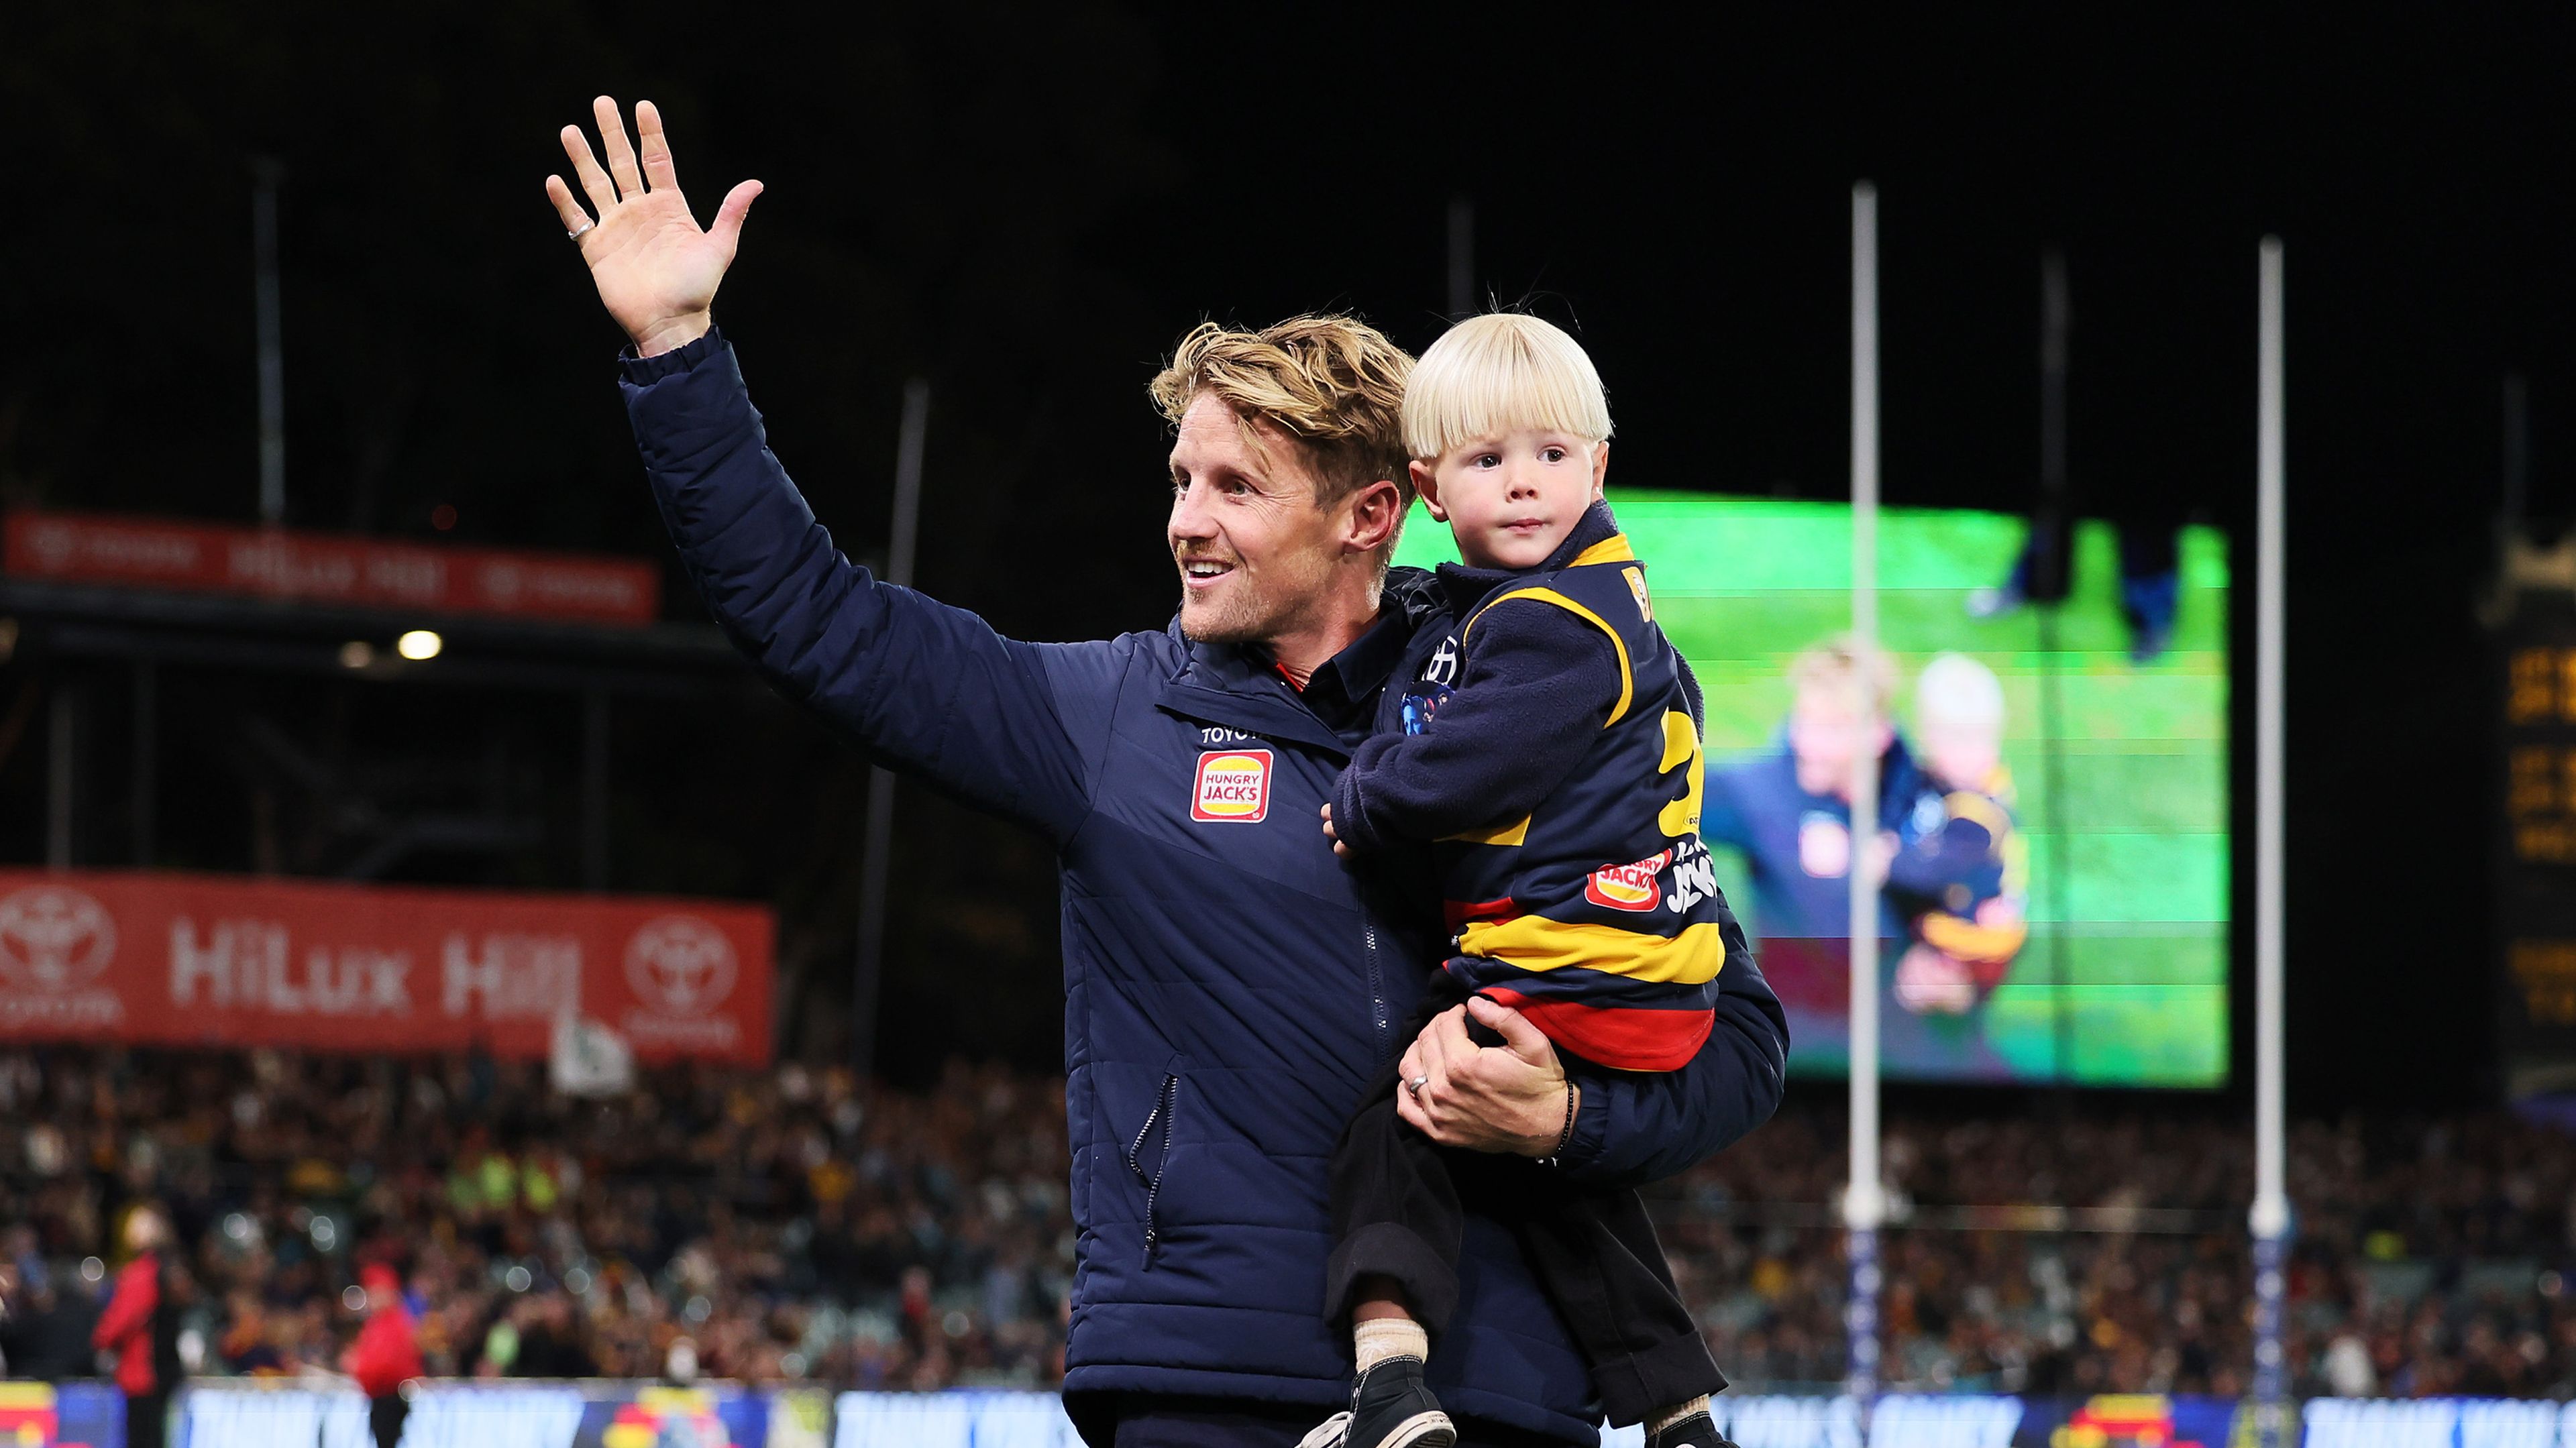 Rory Sloane celebrated with his Wife Belinda, sons Sonny, Bodhi and daughter Summer Maree.